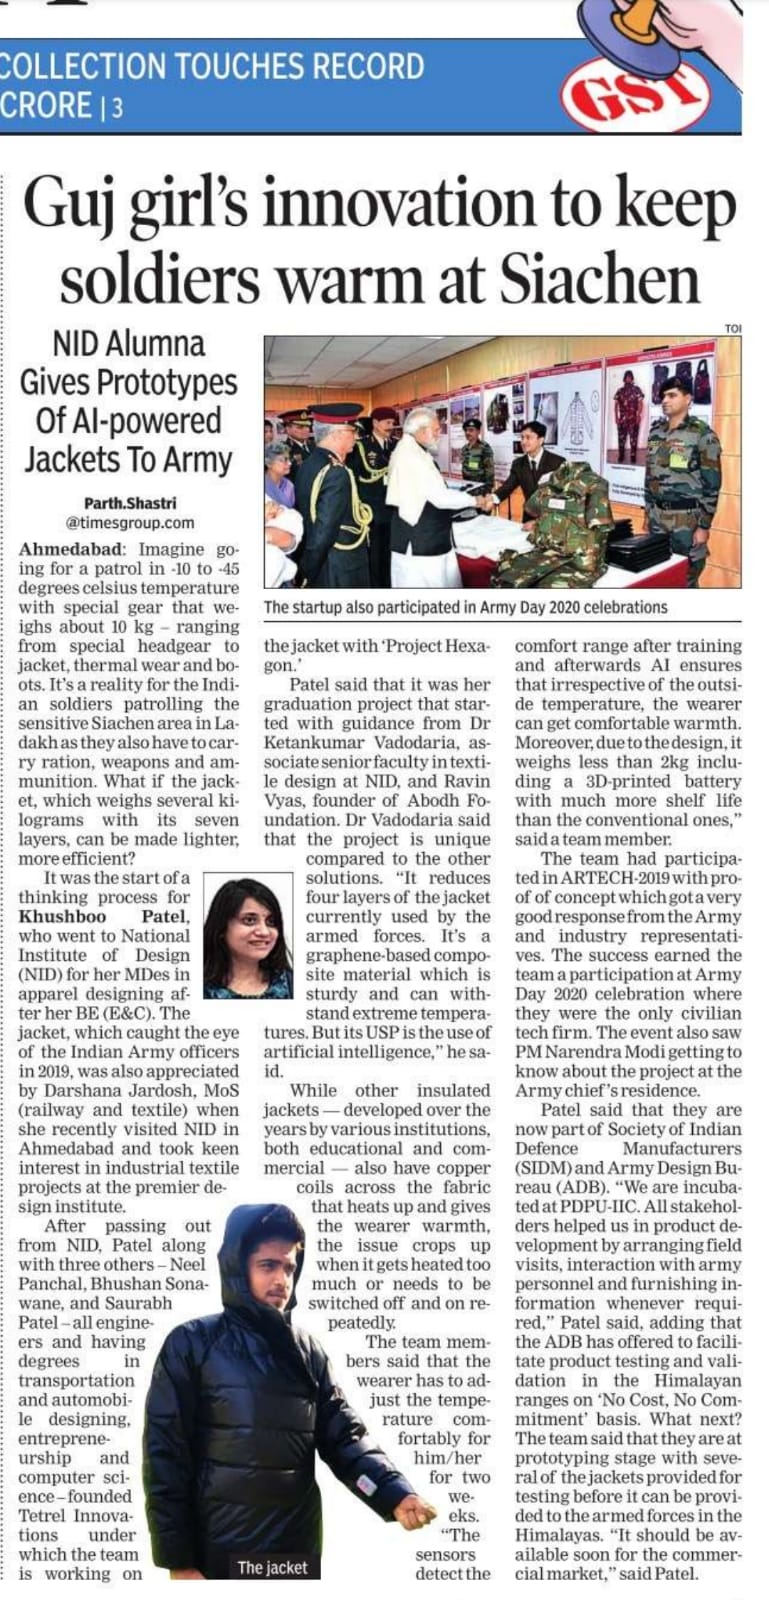 The Times of India Arcticle : https://timesofindia.indiatimes.com/city/ahmedabad/guj-girls-innovation-to-keep-soldiers-warm-at-siachen/articleshow/91243965.cms